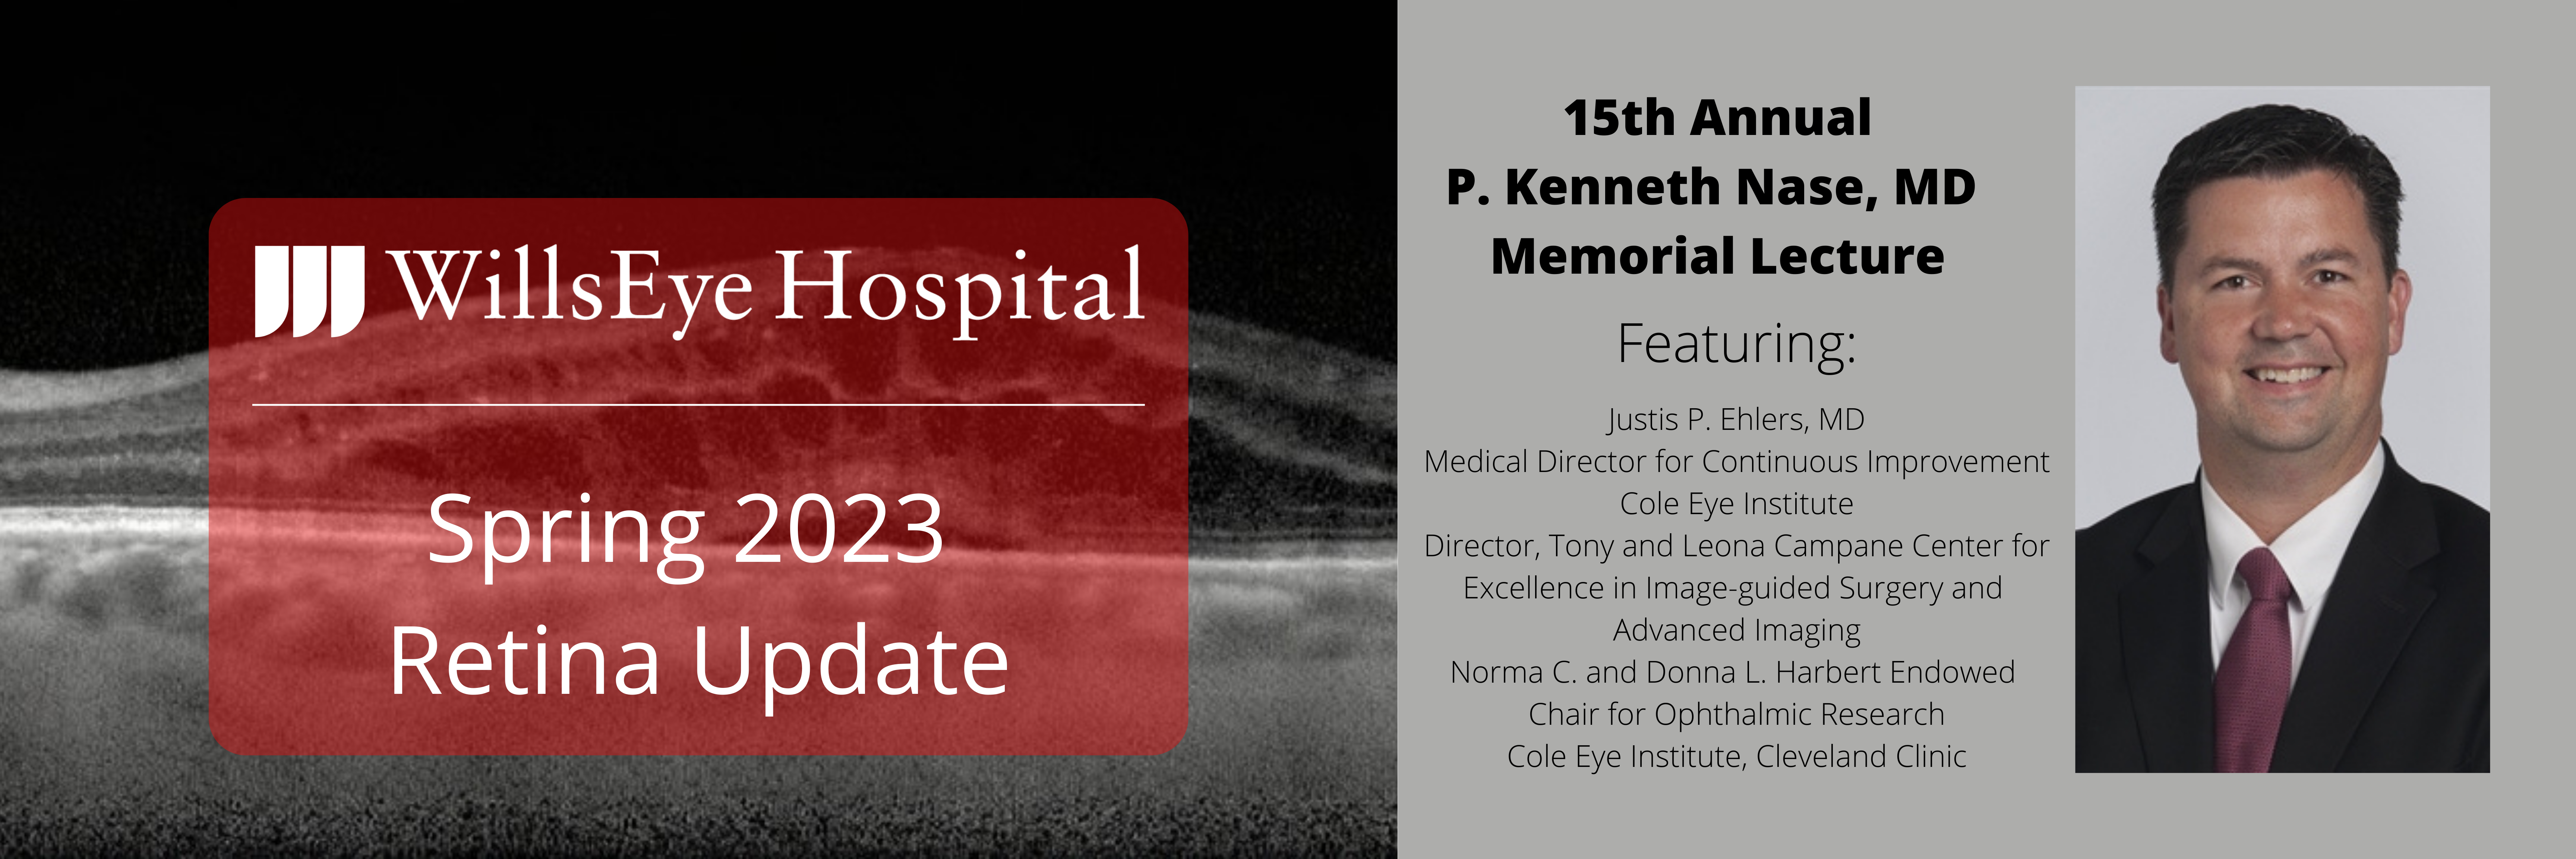 Retina Update - Feat. 15th Annual P. Kenneth Nase Memorial Lecture (5/6/2023 @ 8 a.m. ET) Banner